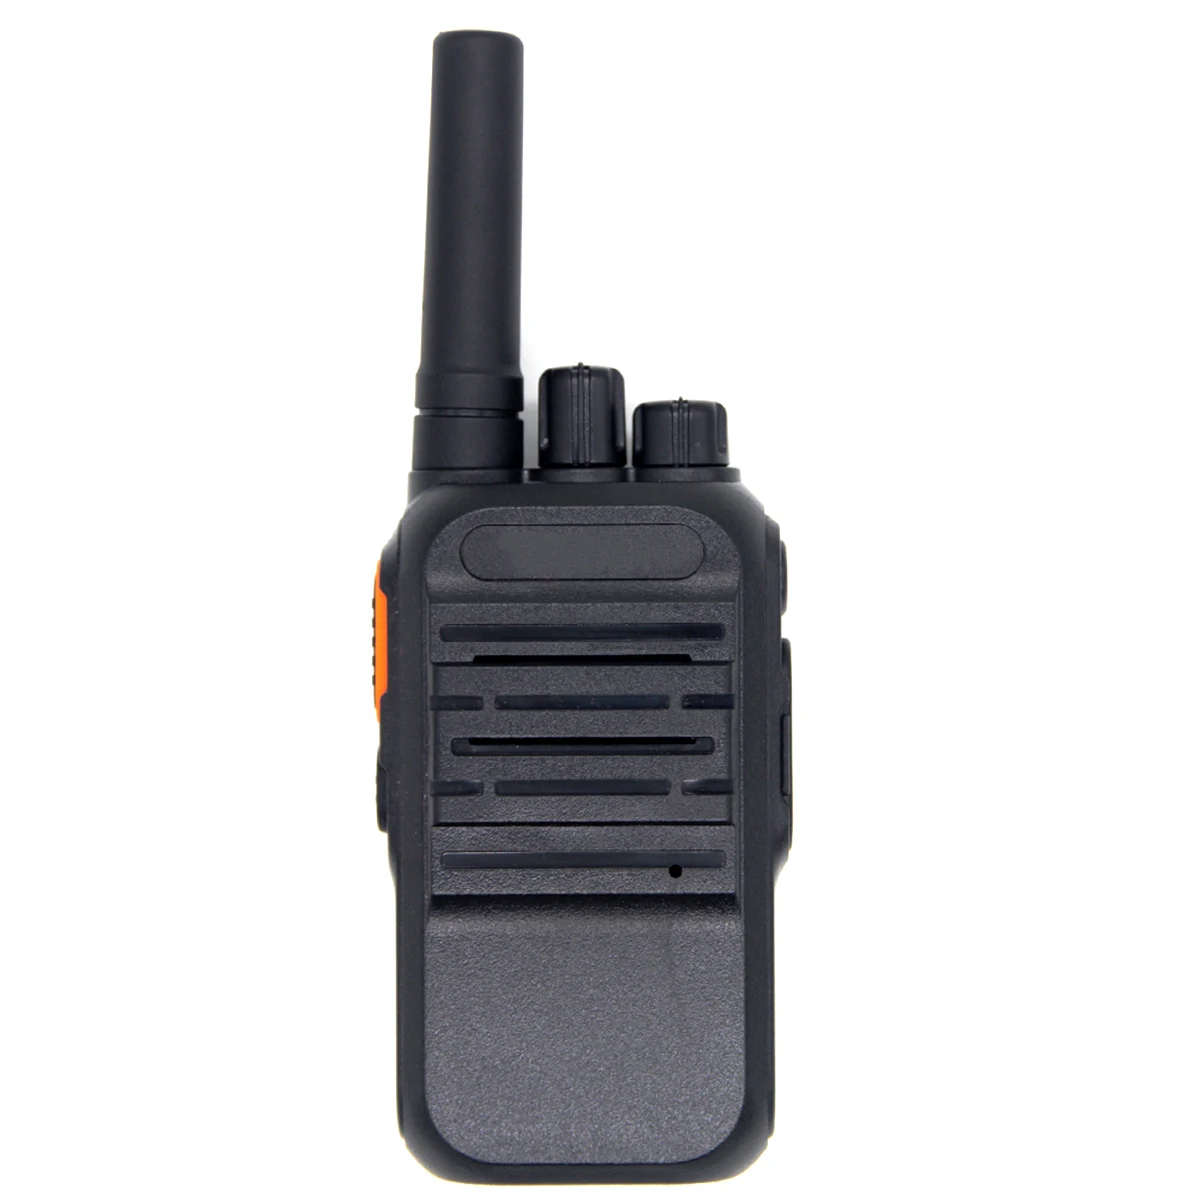 

Mini Walkie Talkie 400-480MHz Handheld Two Way Radio with Voice Prompt High/low power shift PC Programming password